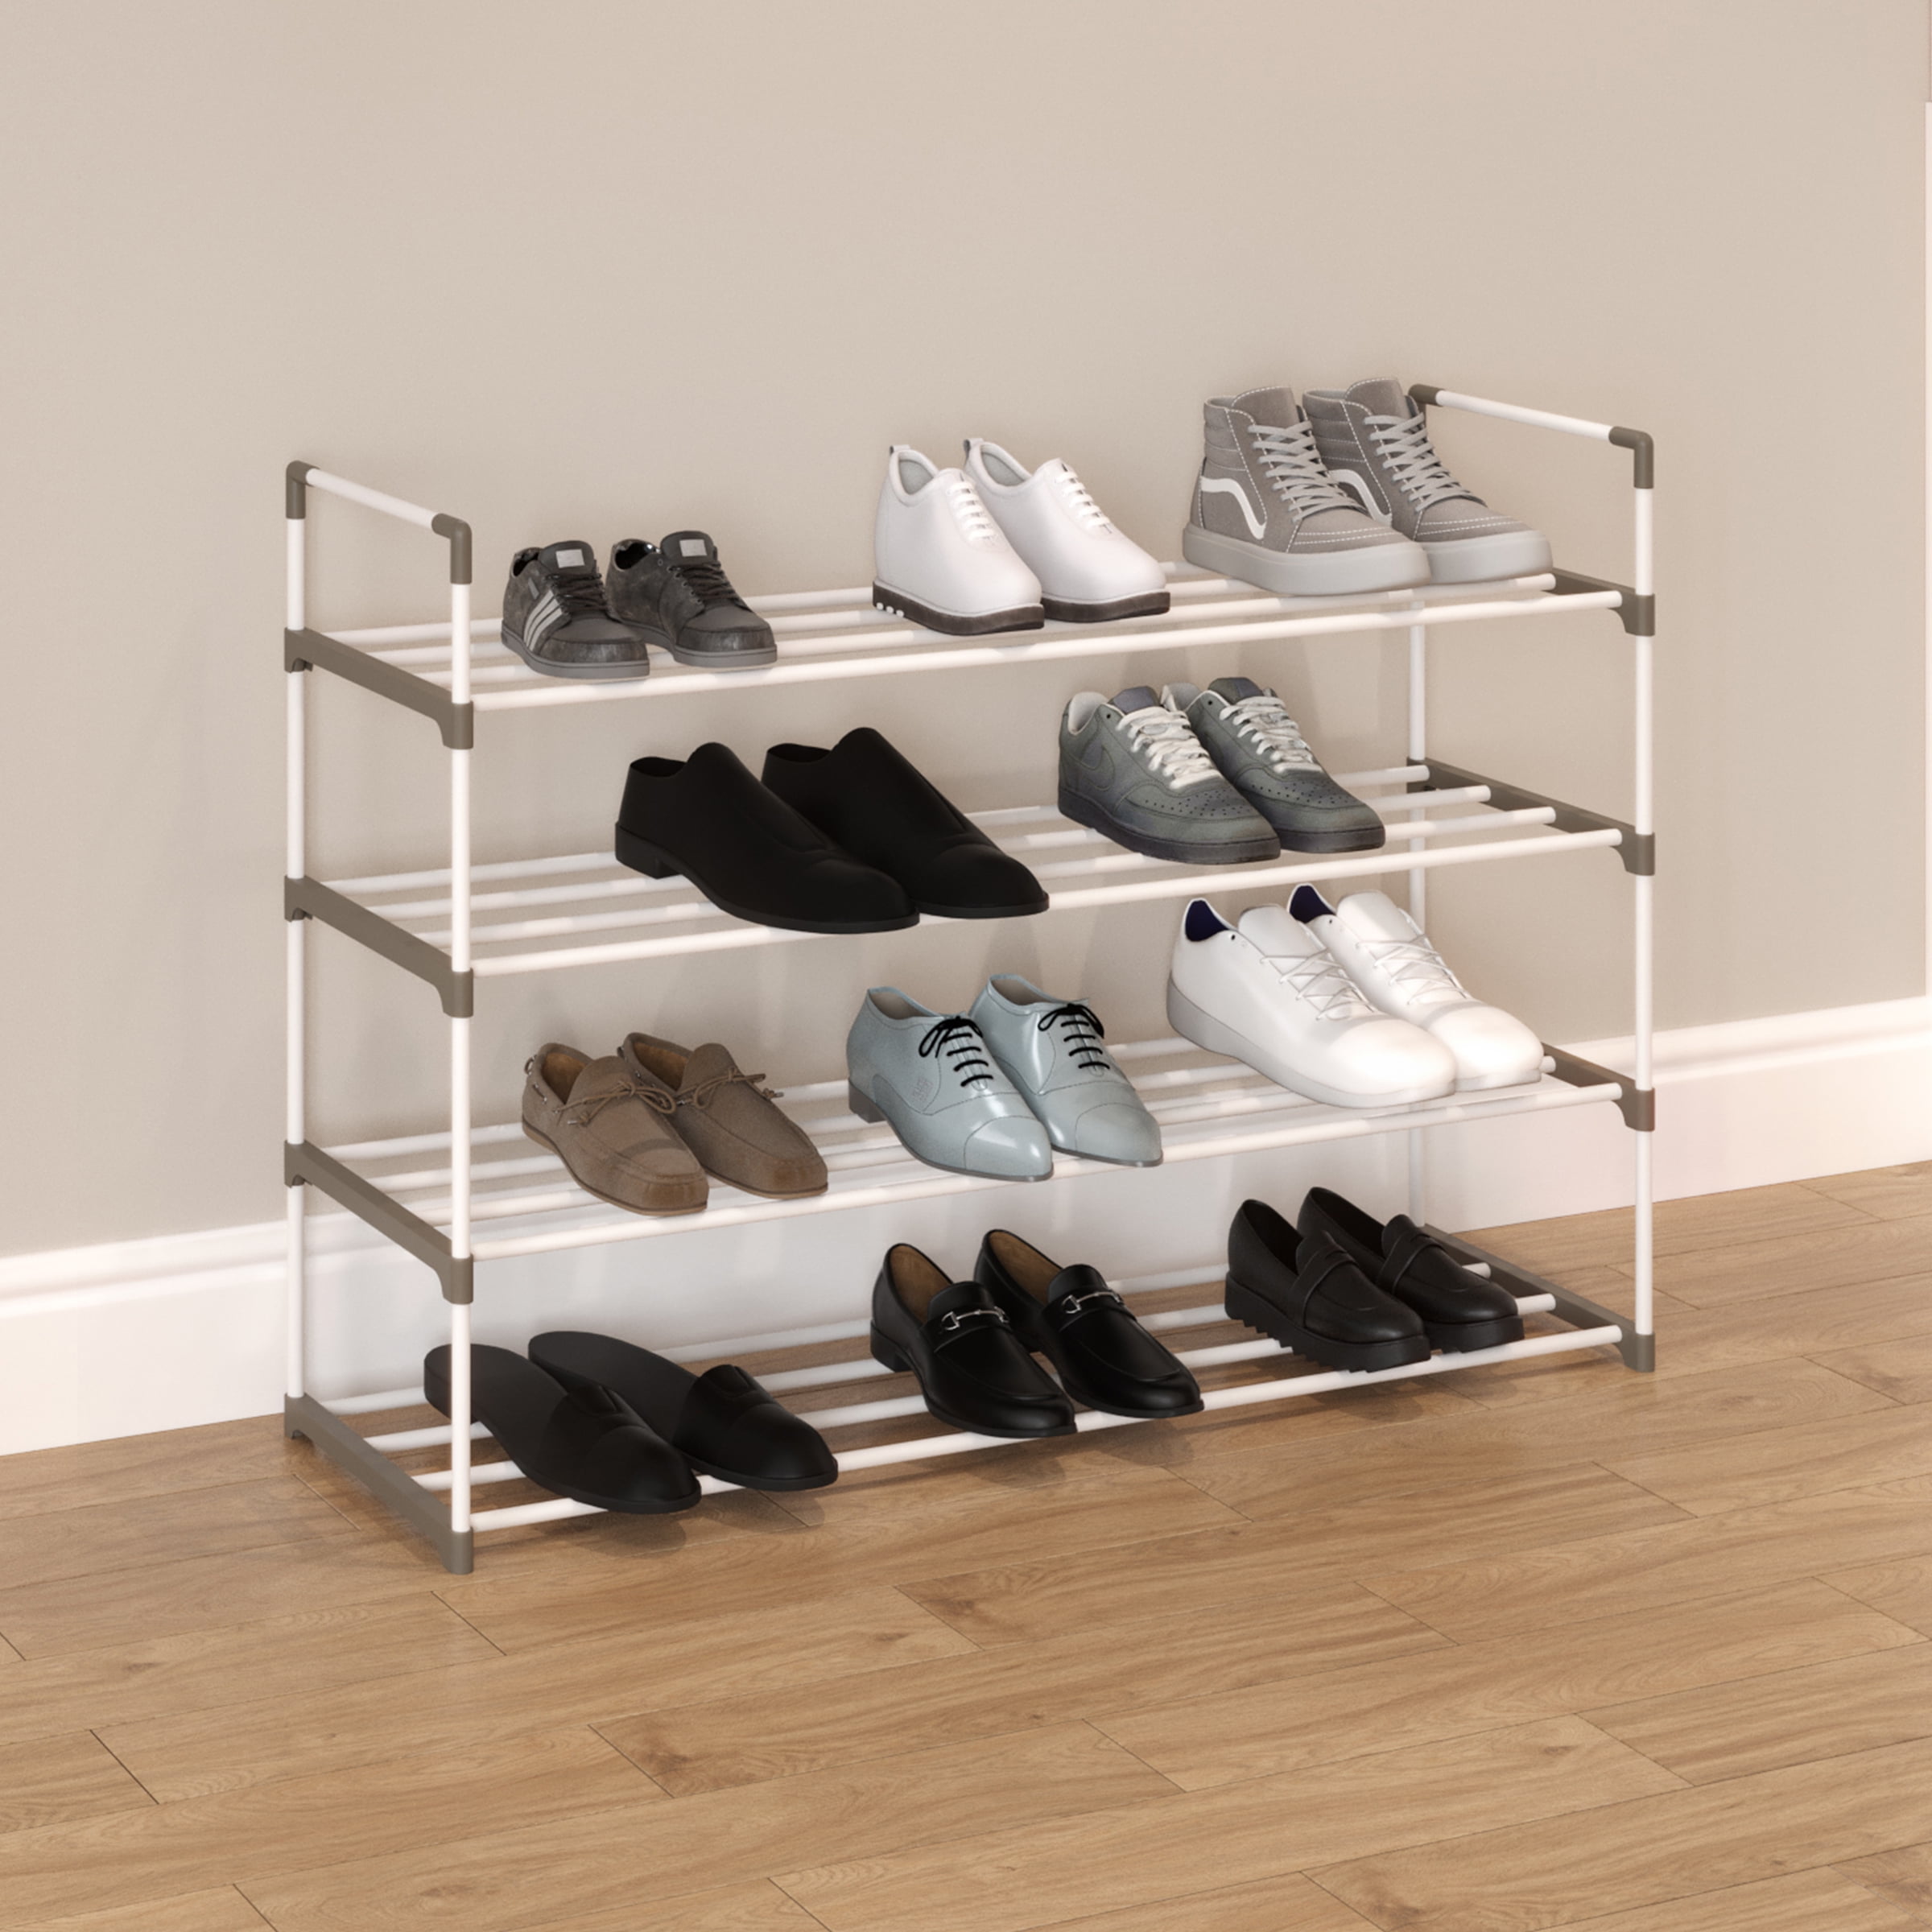 AmazerBath 4 Tiers Shoe Rack for Closet, Shoe Storage Organizer for 16-20 Pairs of Shoes, Shoe Shelf with Removable Pocket for Entryway Bedroom